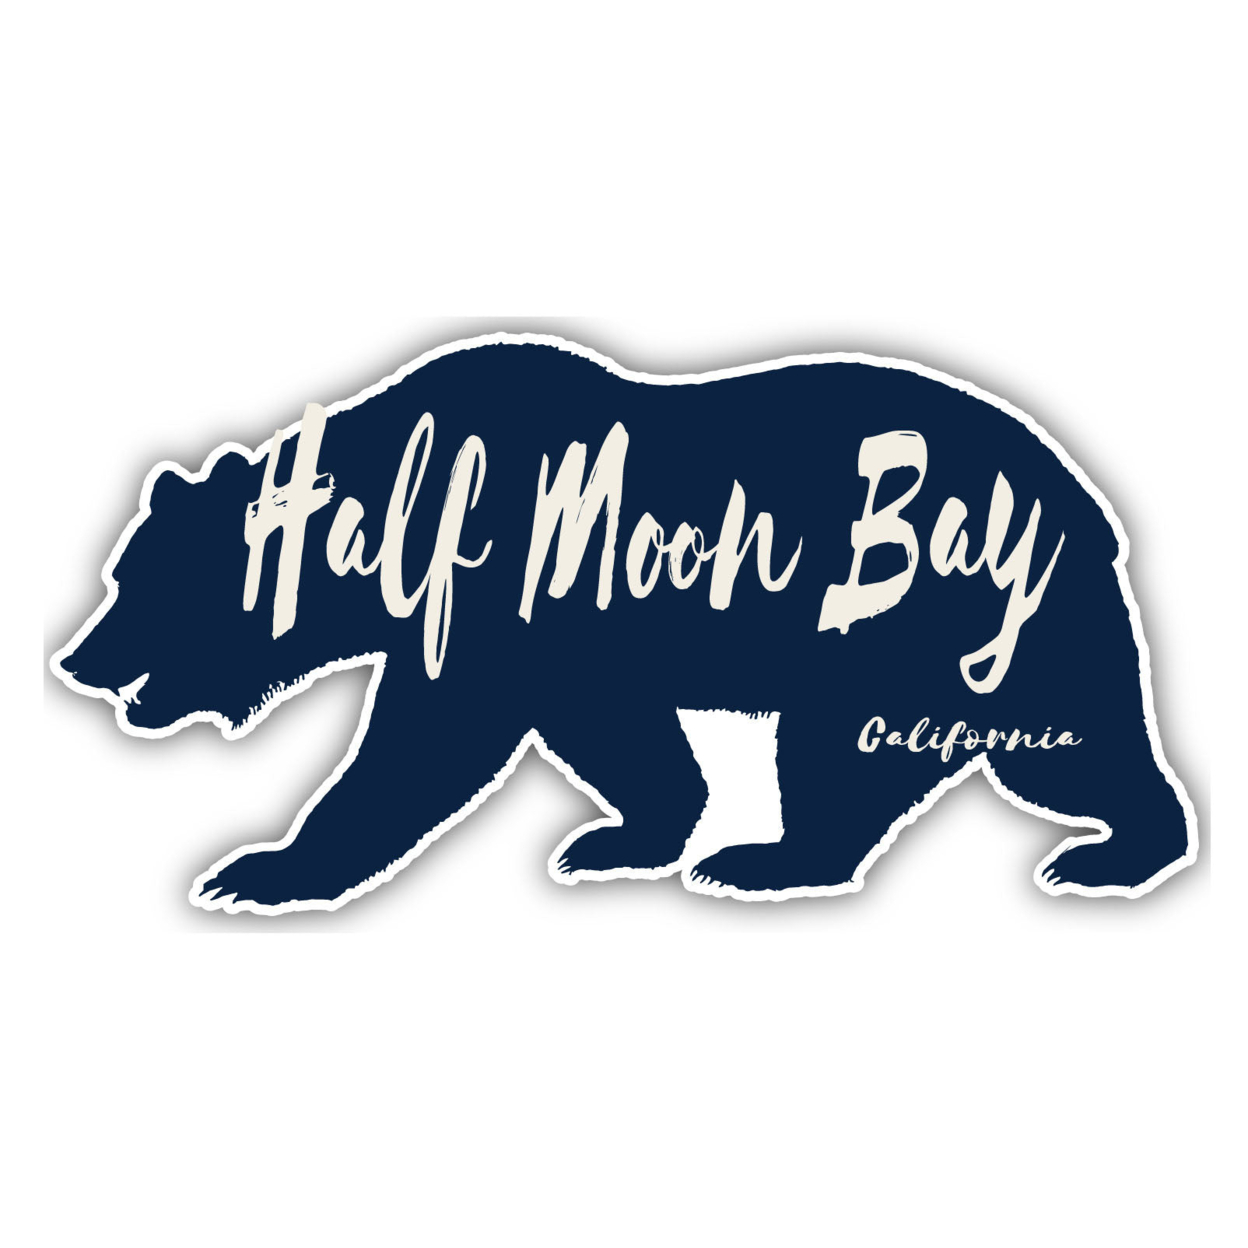 Half Moon Bay California Souvenir Decorative Stickers (Choose Theme And Size) - 4-Pack, 2-Inch, Bear